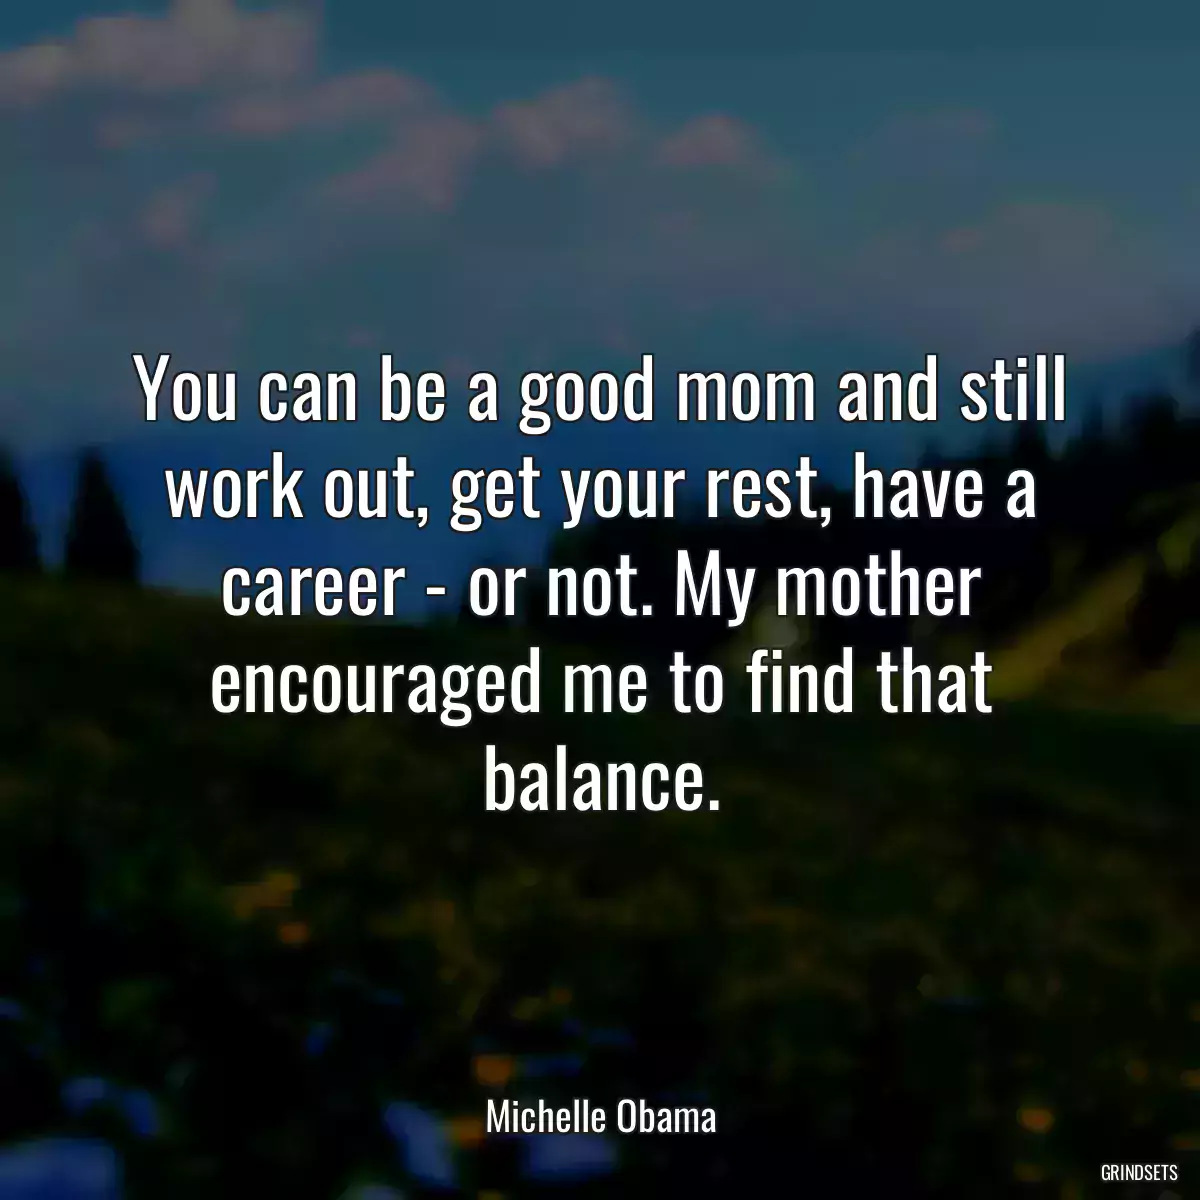 You can be a good mom and still work out, get your rest, have a career - or not. My mother encouraged me to find that balance.